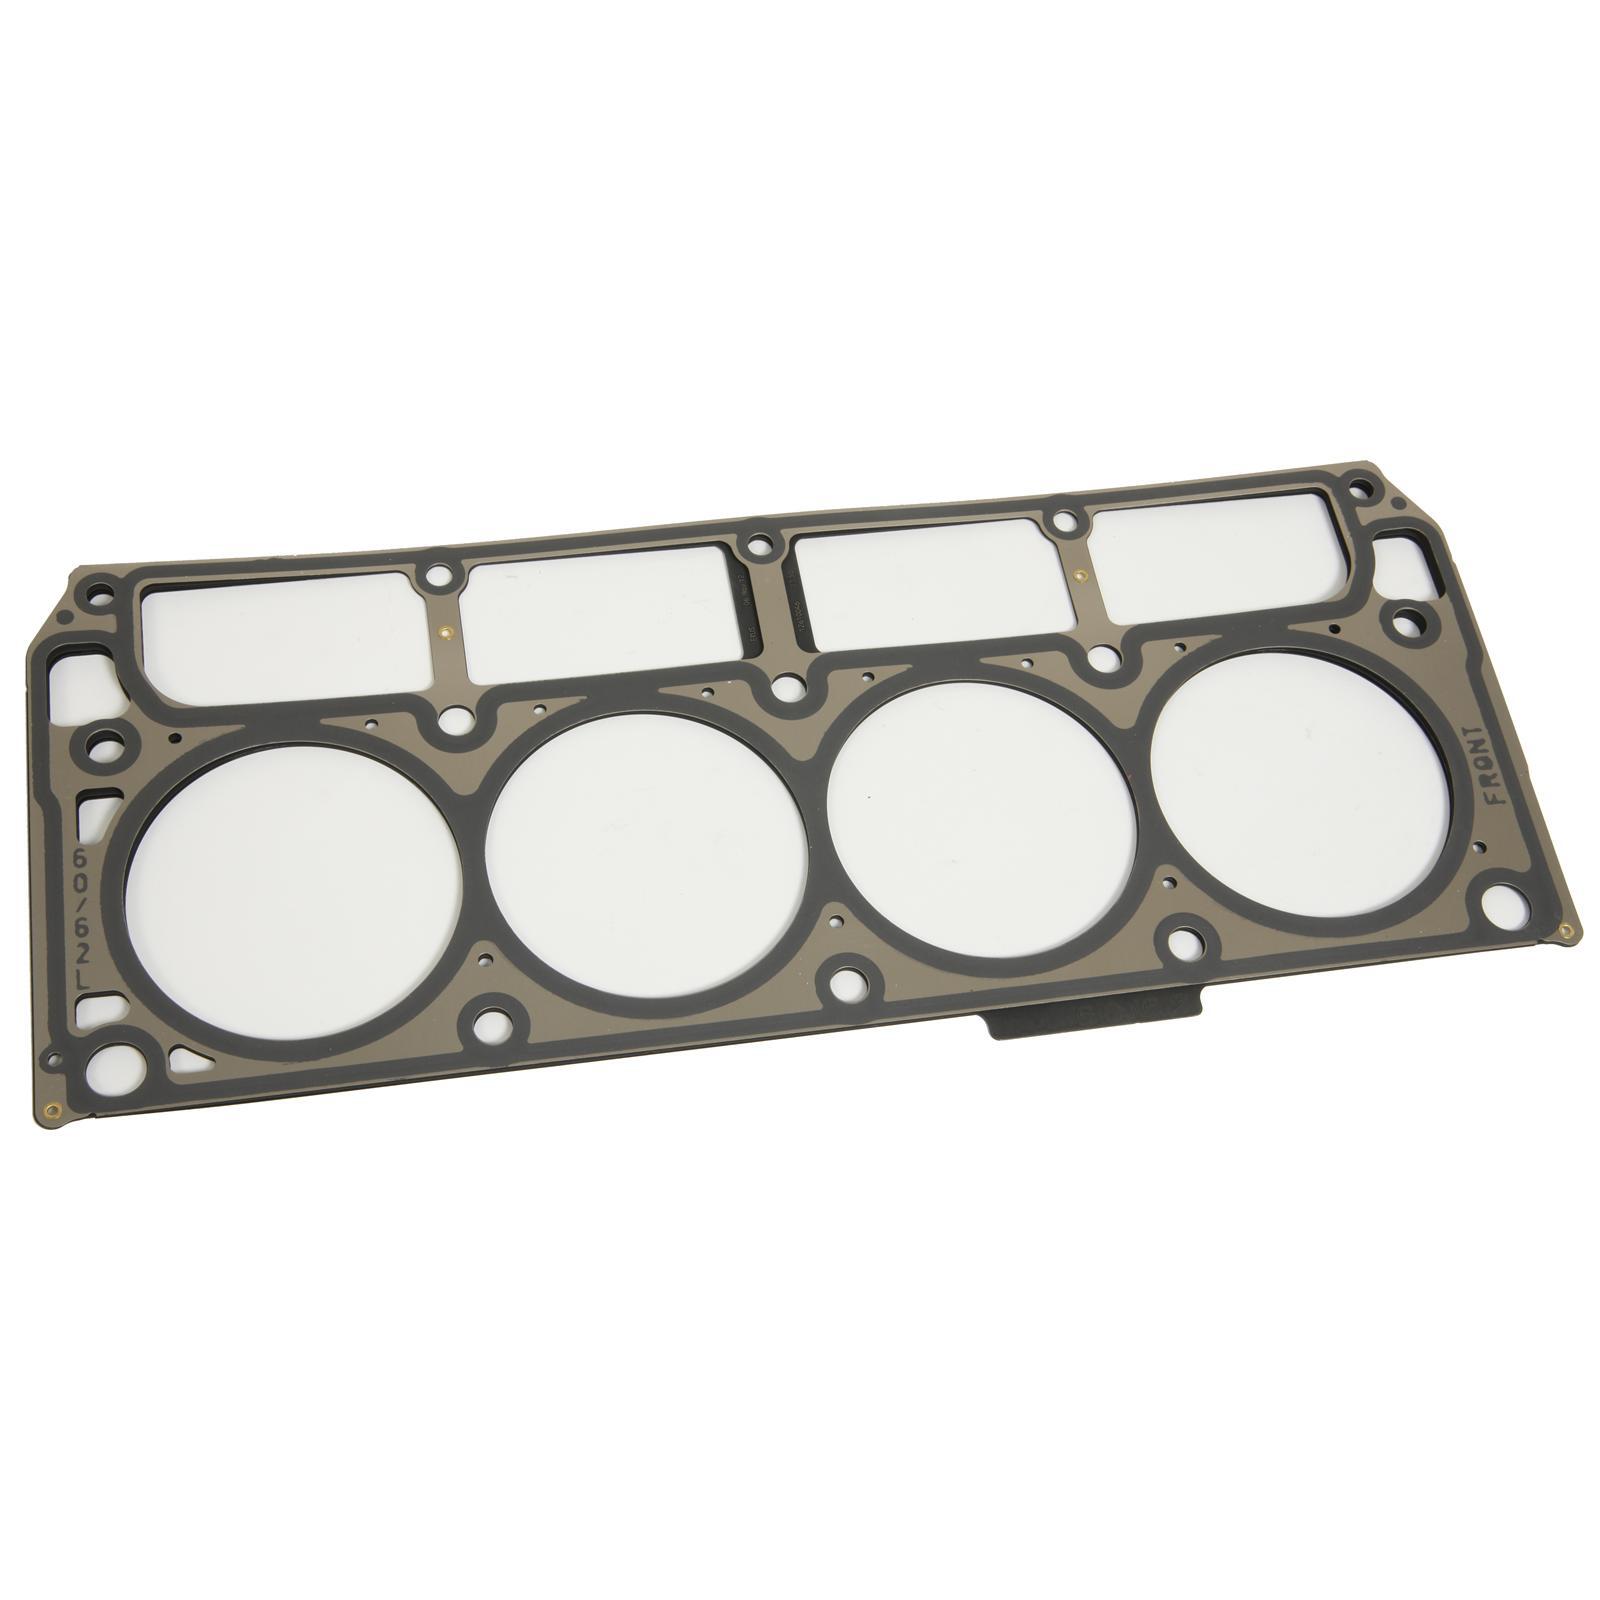 GM Performance Head Gasket, MLS, 4.080 in. Bore, .051 in. Compressed Thickness, Chev For Holden, LS3/L92, Each